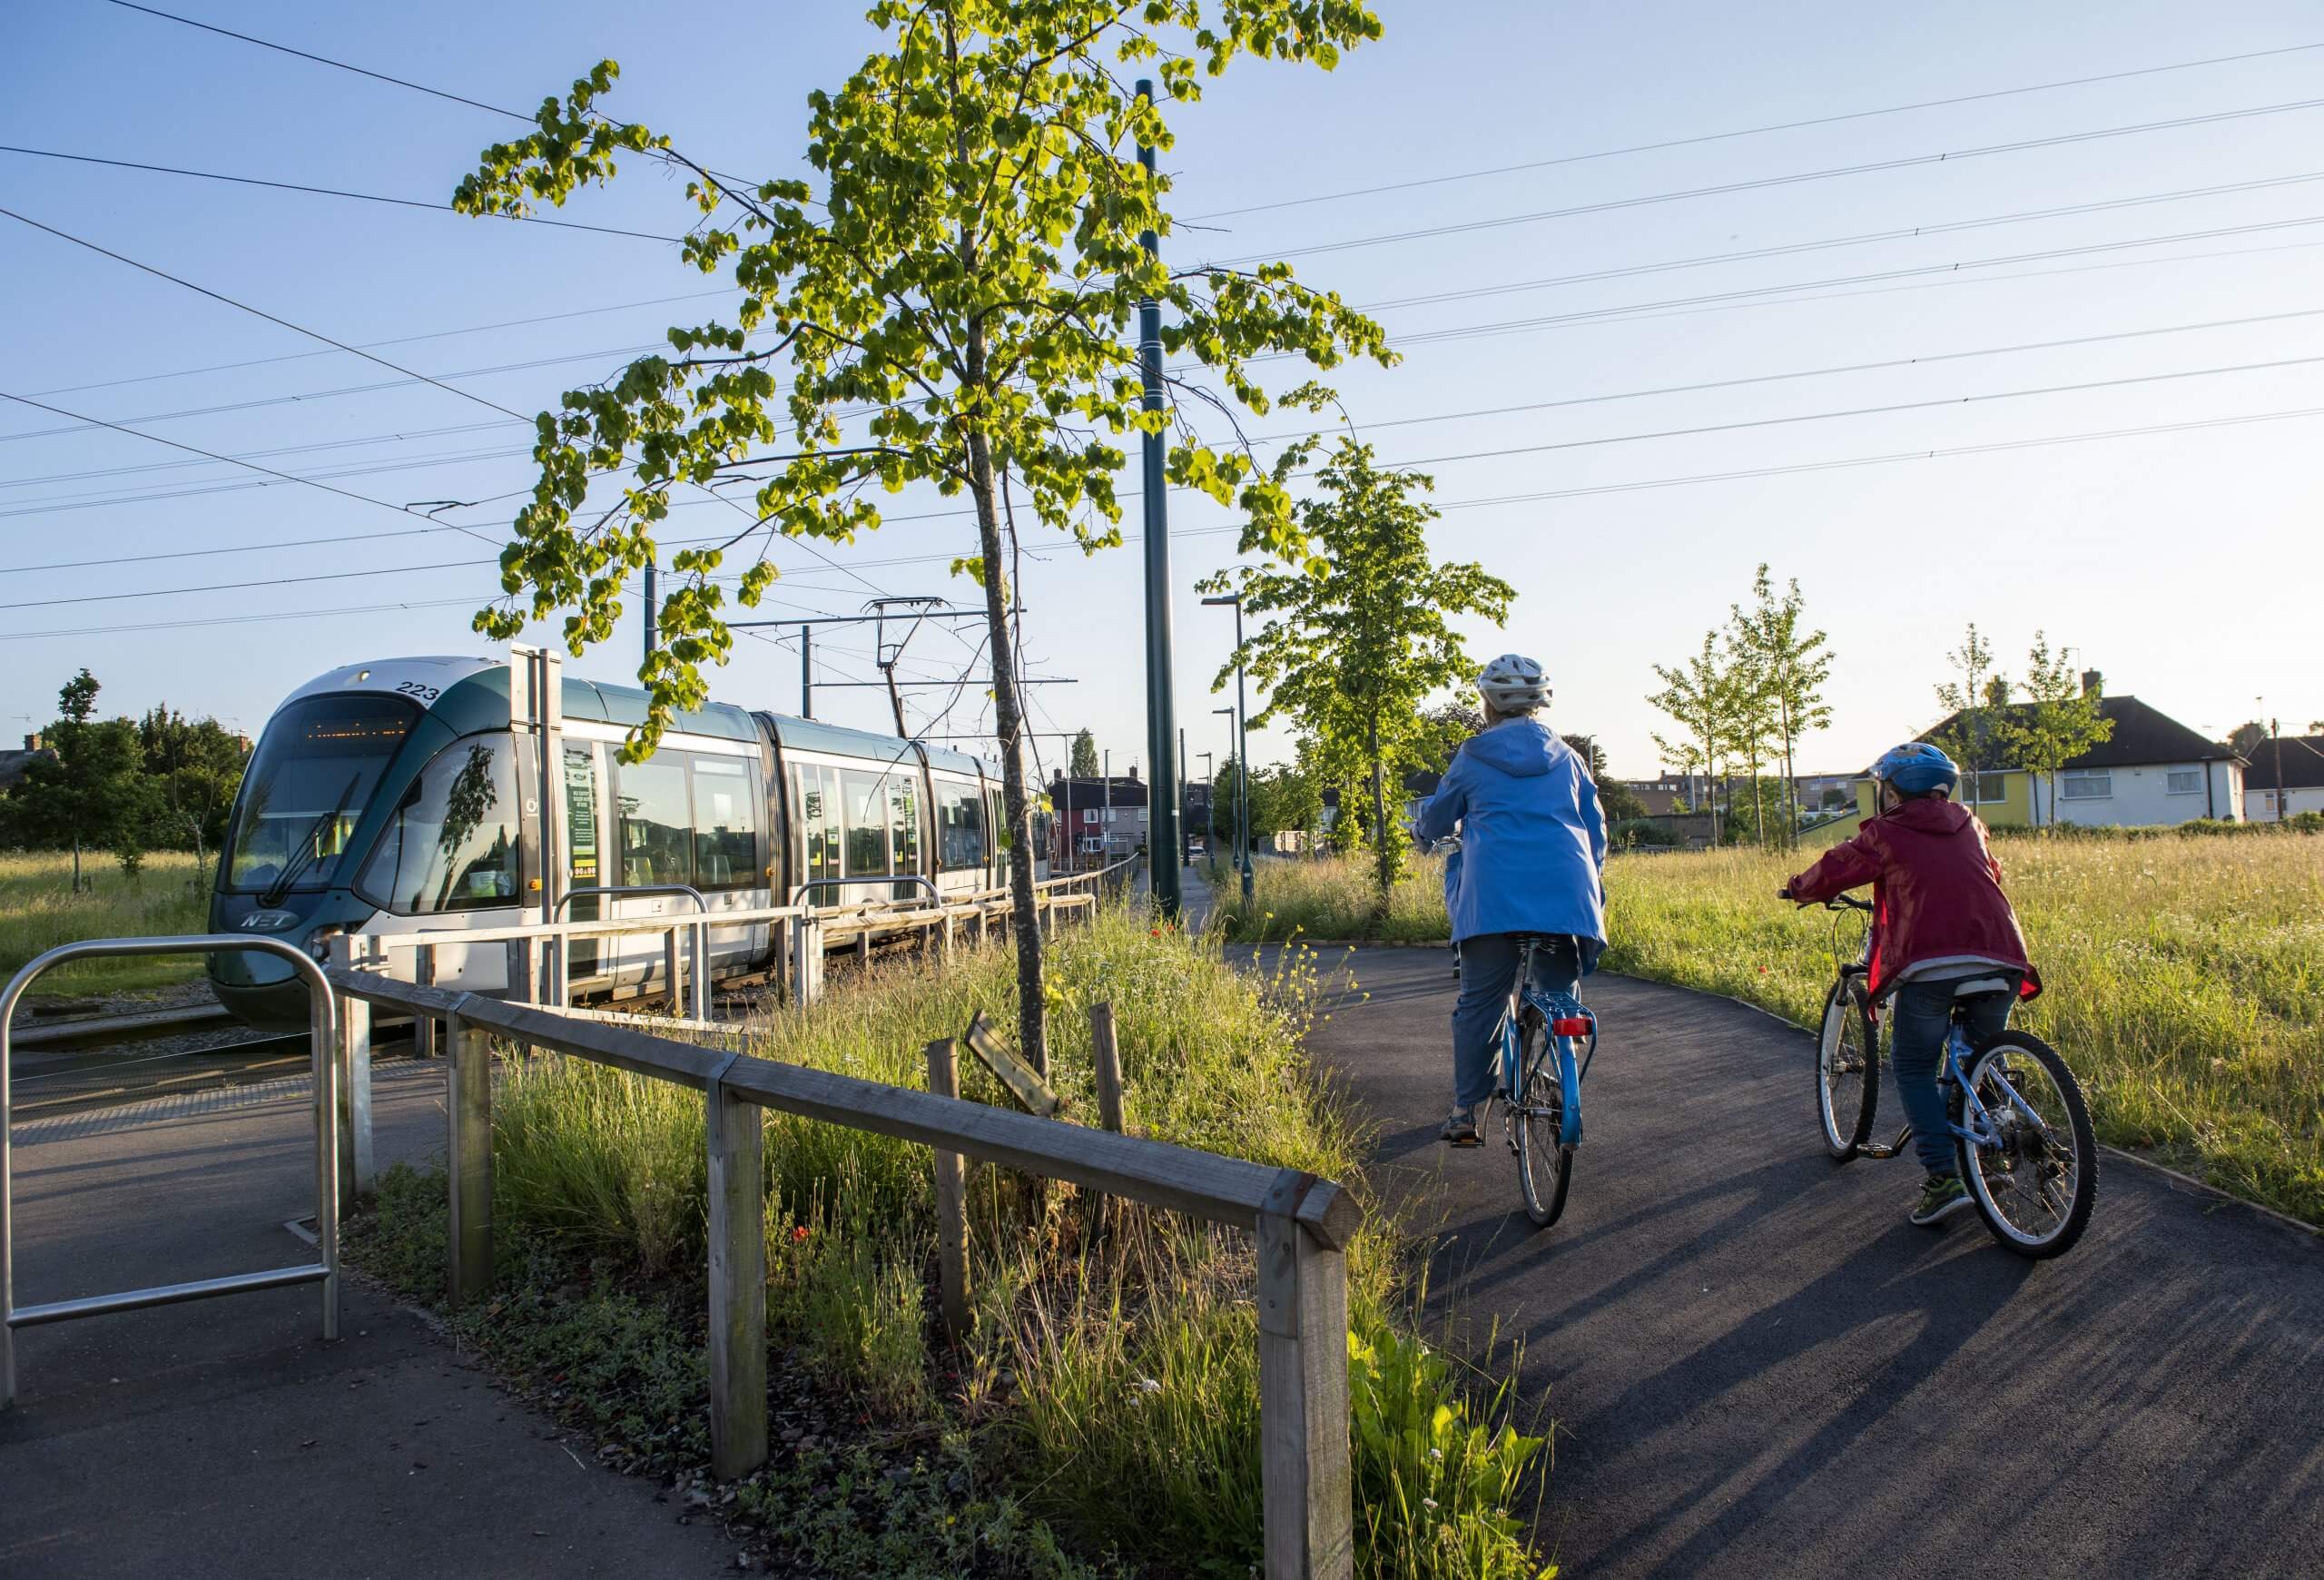 Adult and child cycling next to a tram